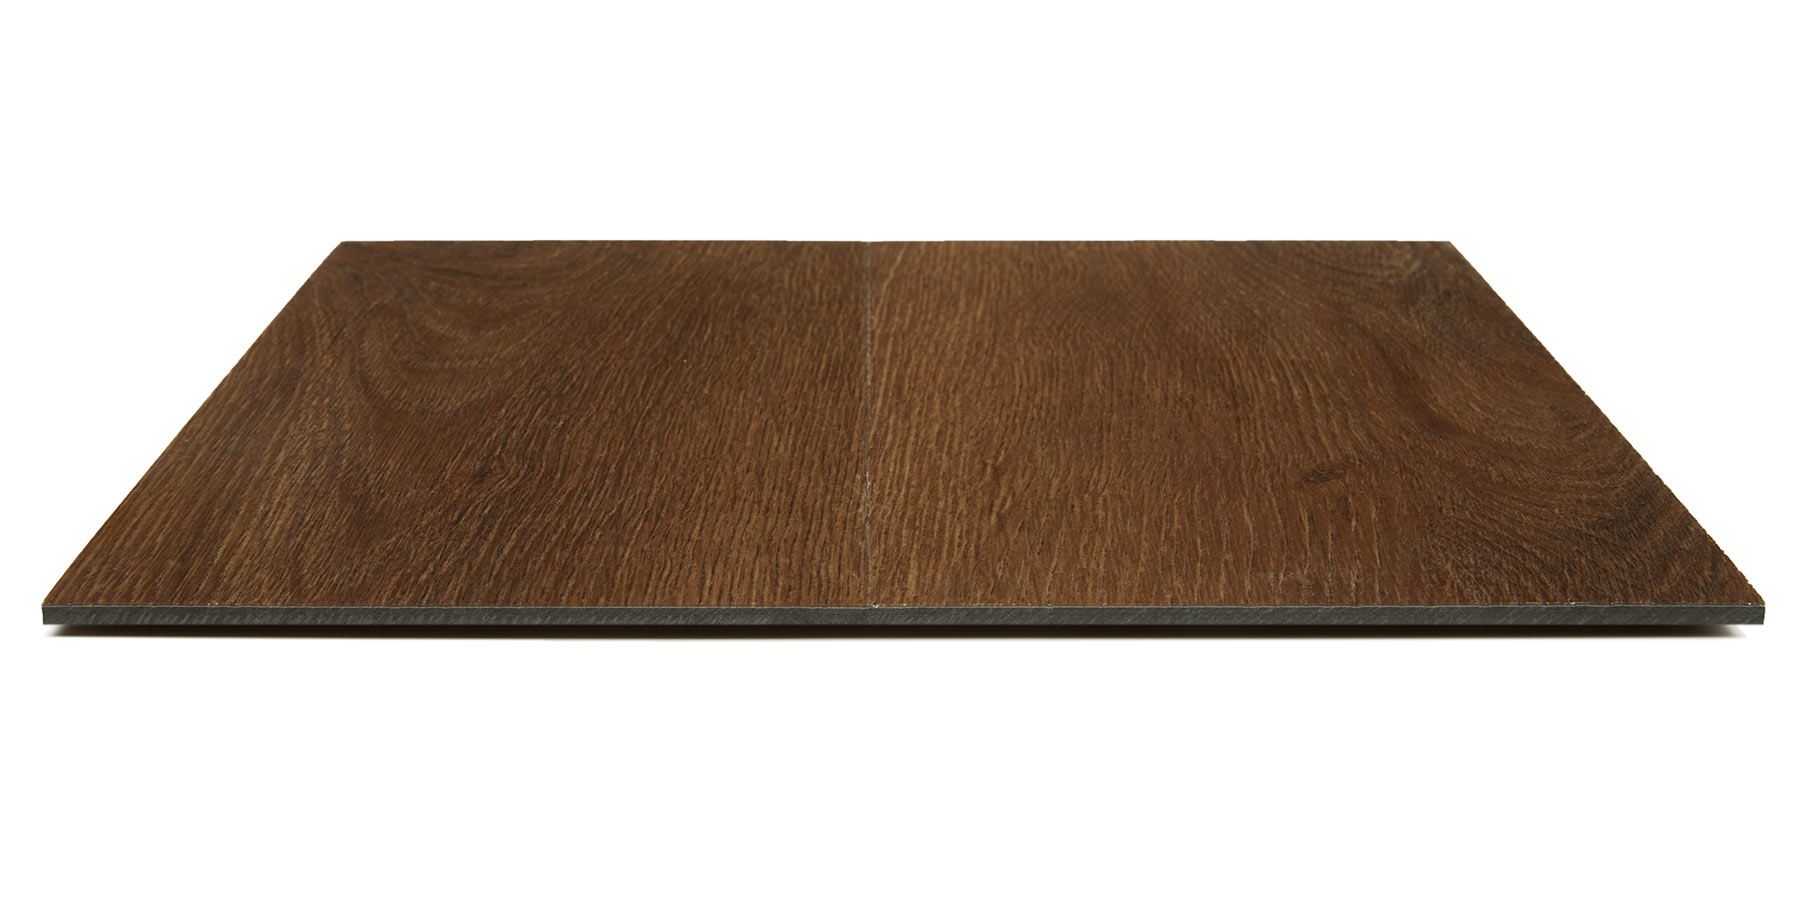 Hot And Heavy Grown Up Commercial Vinyl Plank Flooring